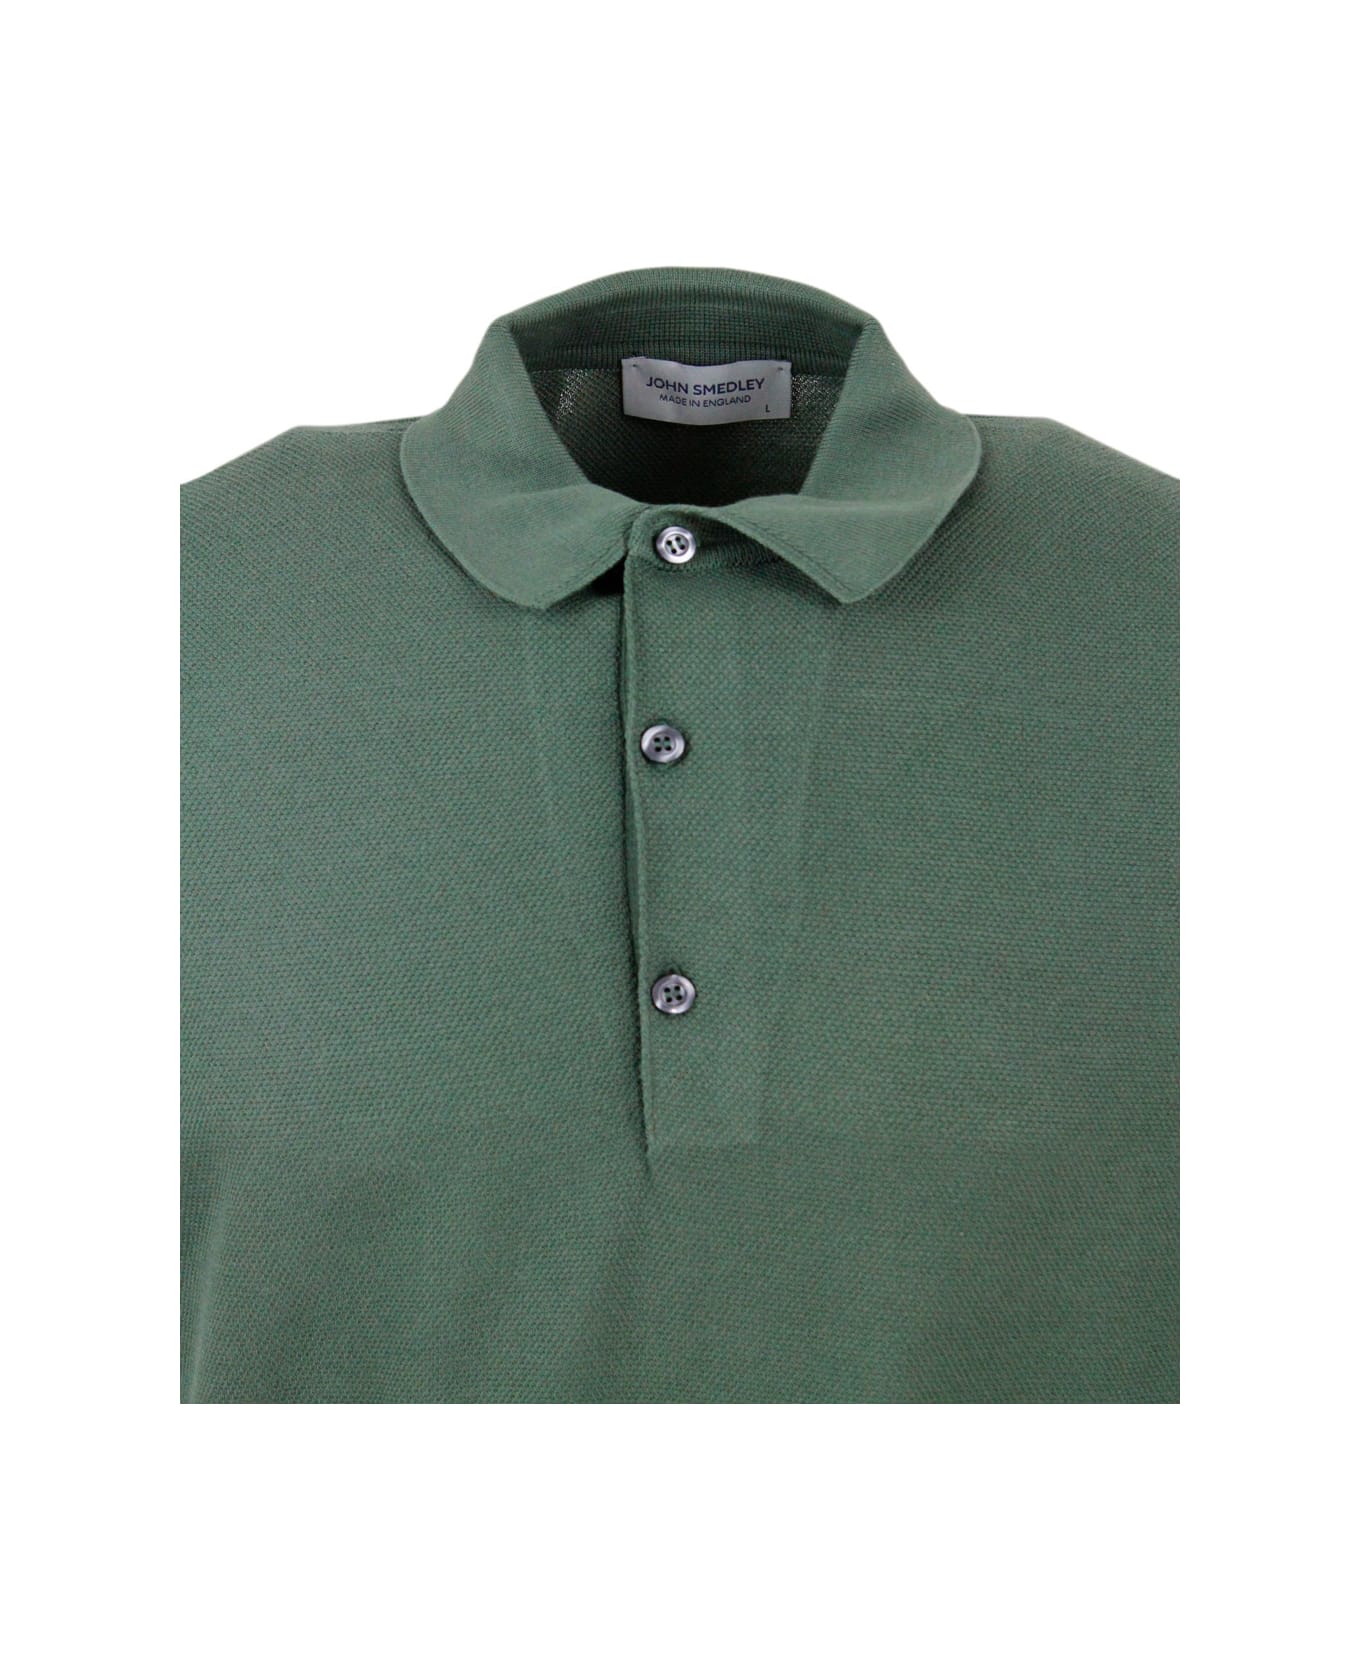 John Smedley Short-sleeved Polo Shirt In Extrafine Piqué Cotton Thread With Three Buttons - Green